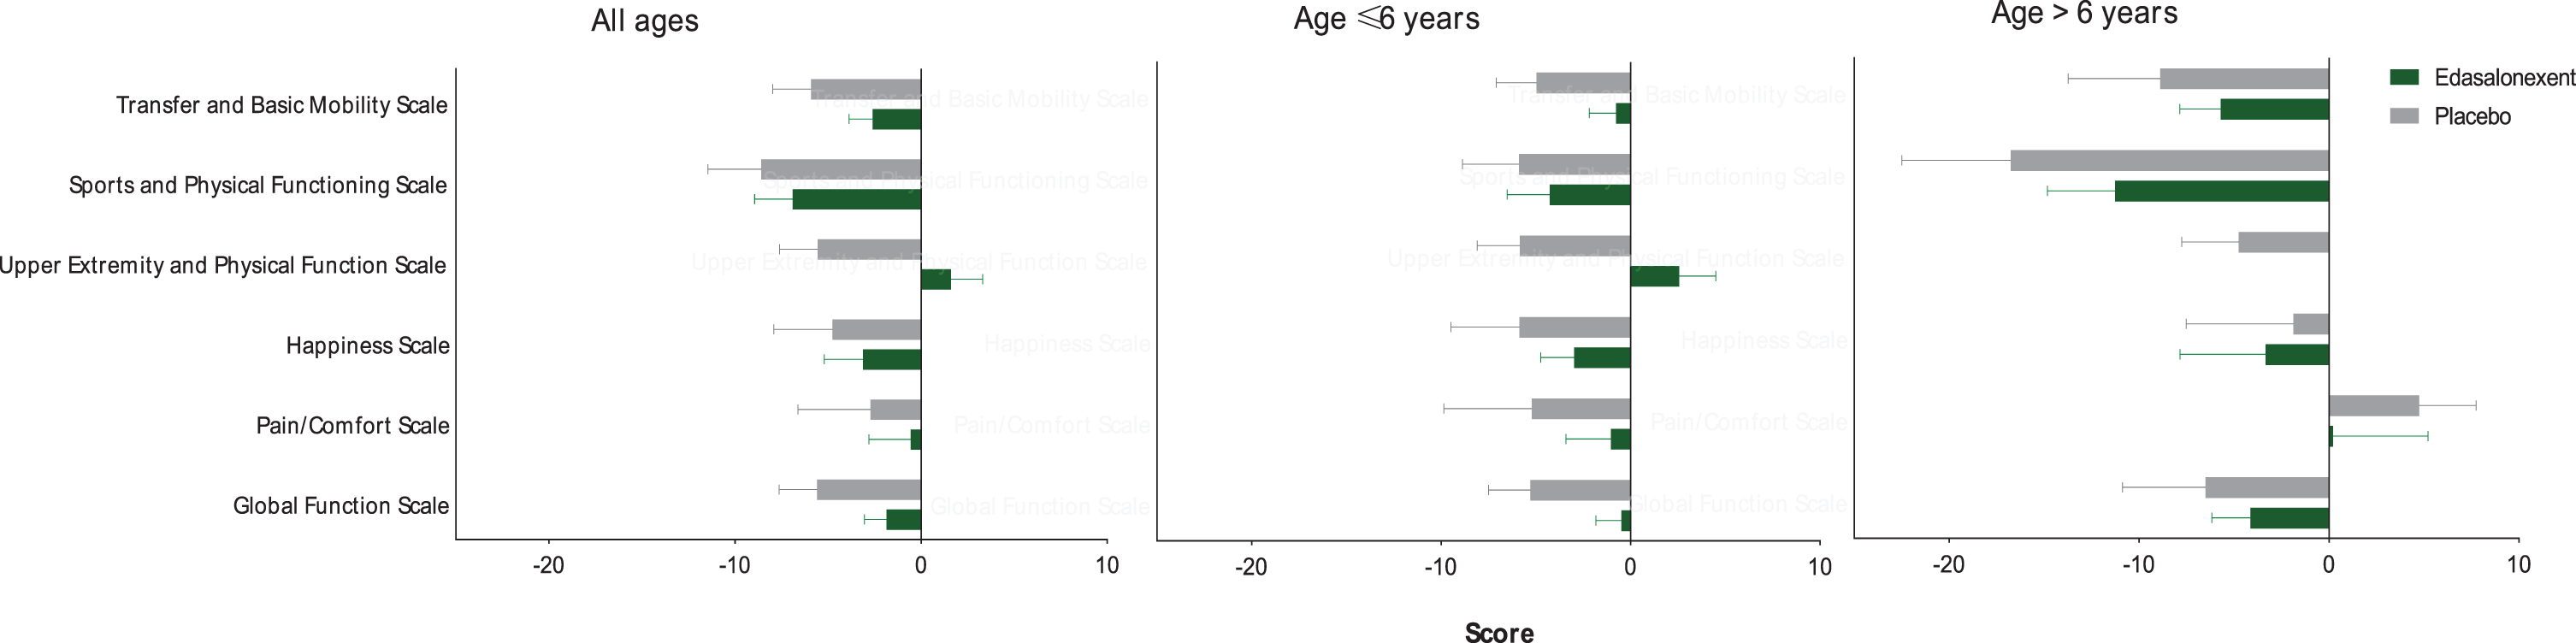 PODCI Scales for the Overall Population and by Age Group for Patients ≤6.0 years and > 6.0 years.